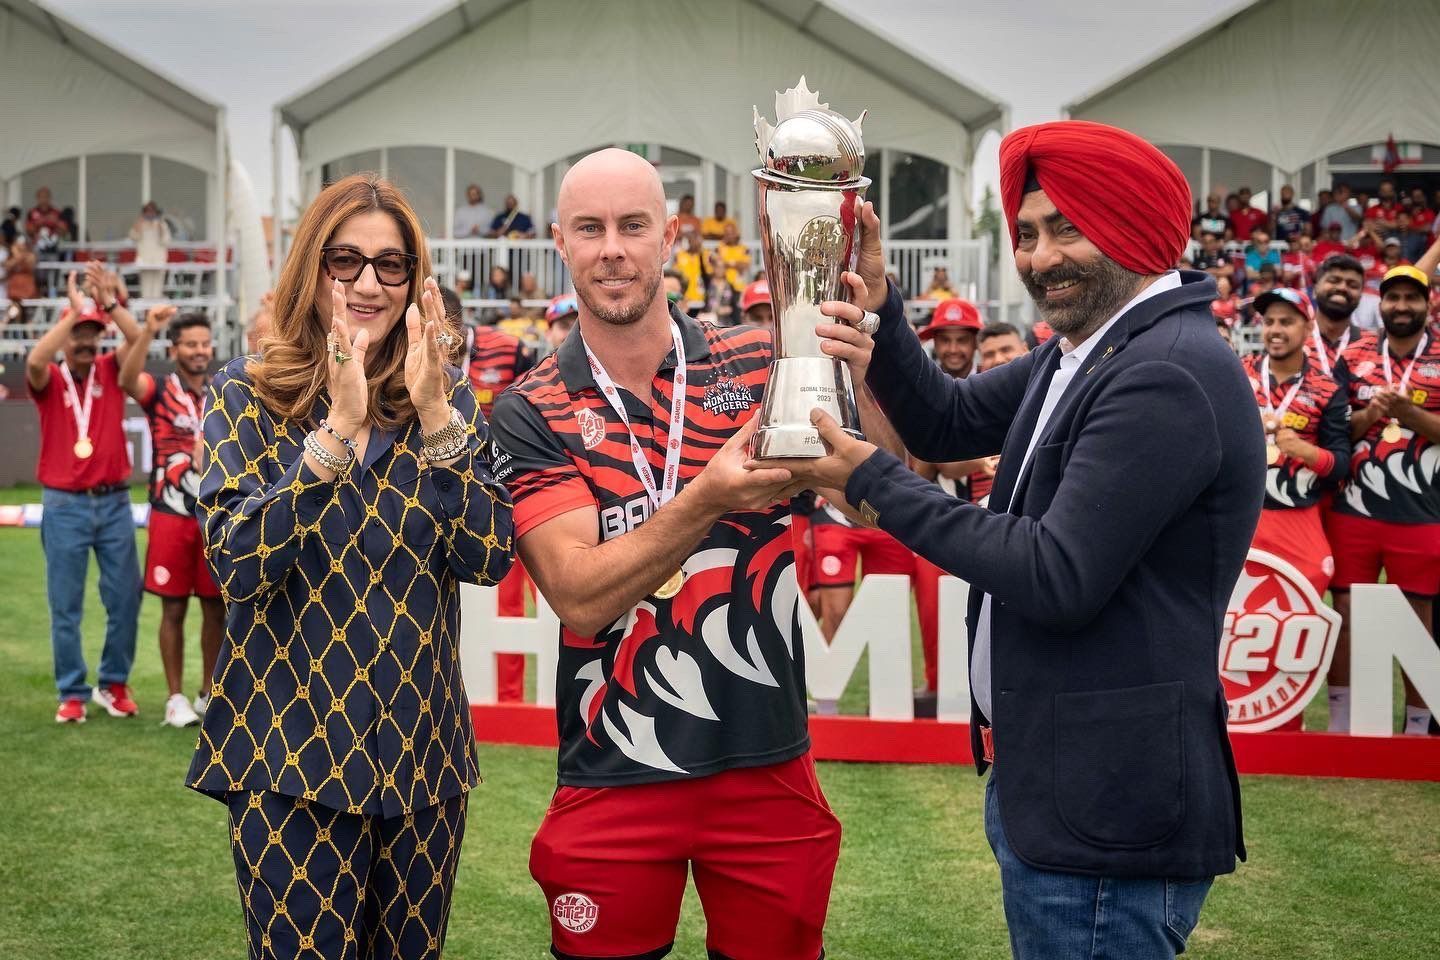 Chris Lynn led the Tigers to a title victory (PC: GT20 Canada)